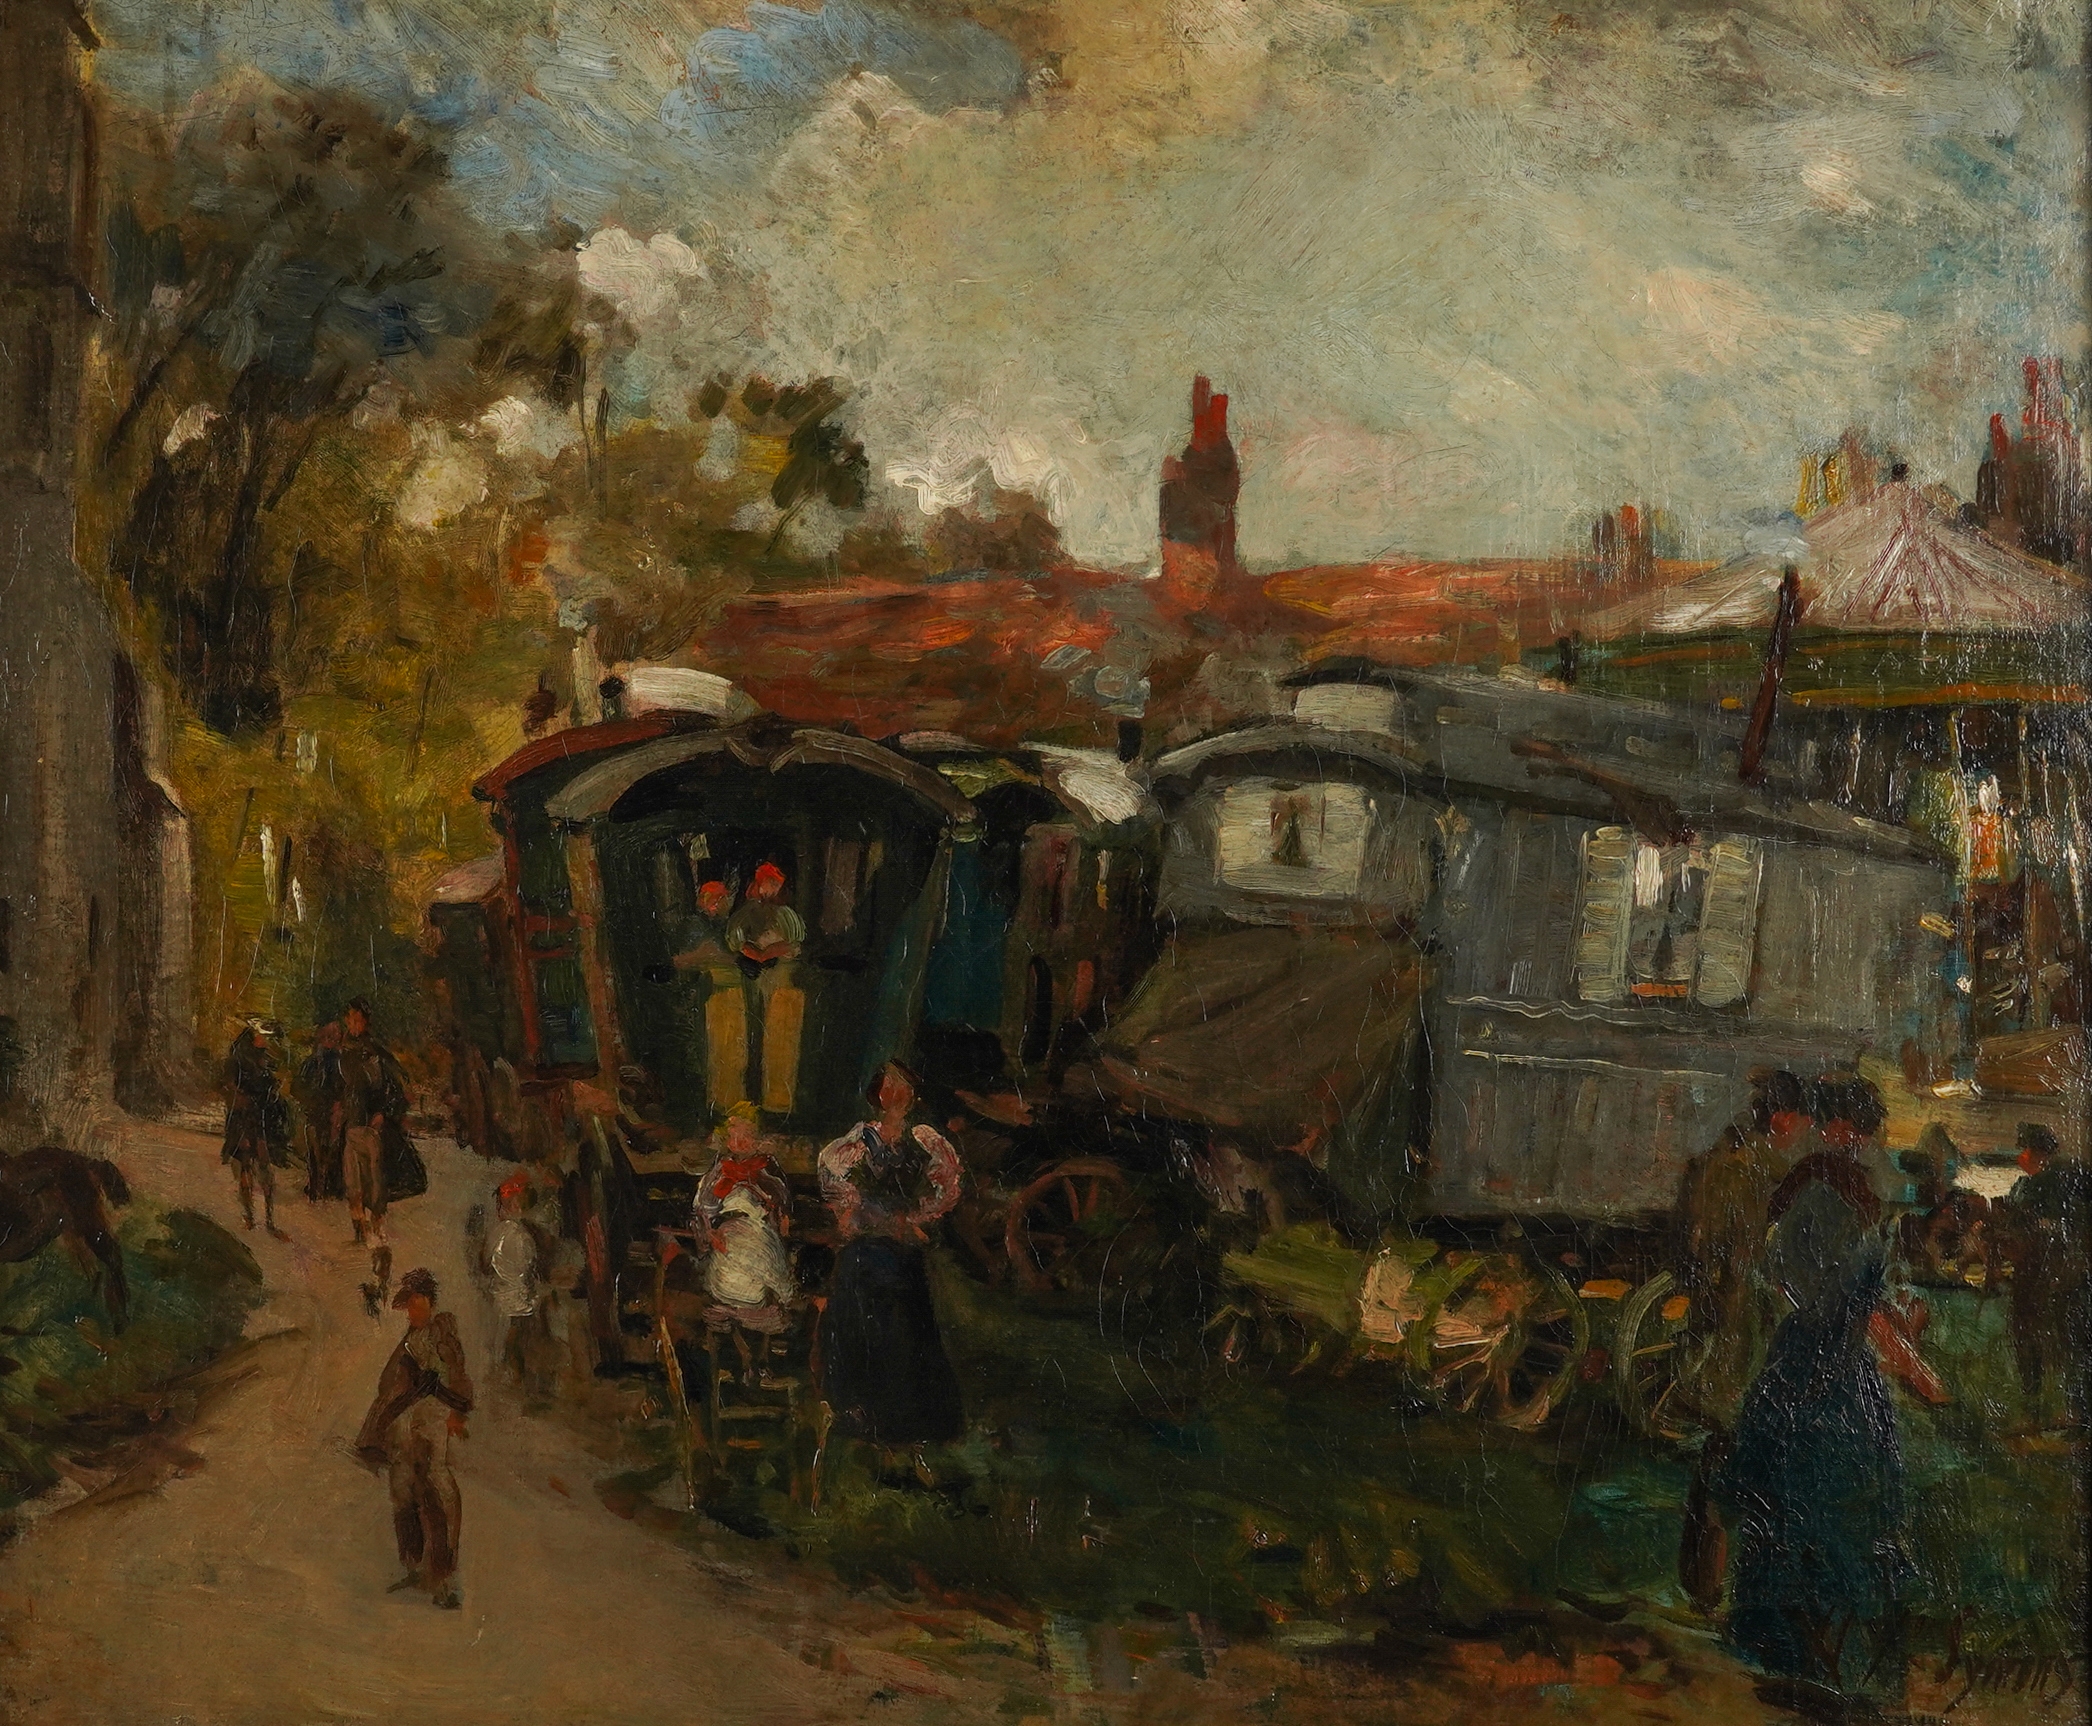 Gypsy Fair, Battle Square signed 'W X Symons' (lower right) oil on canvas 64 x 76cm, Estimate: £800 - £1,200